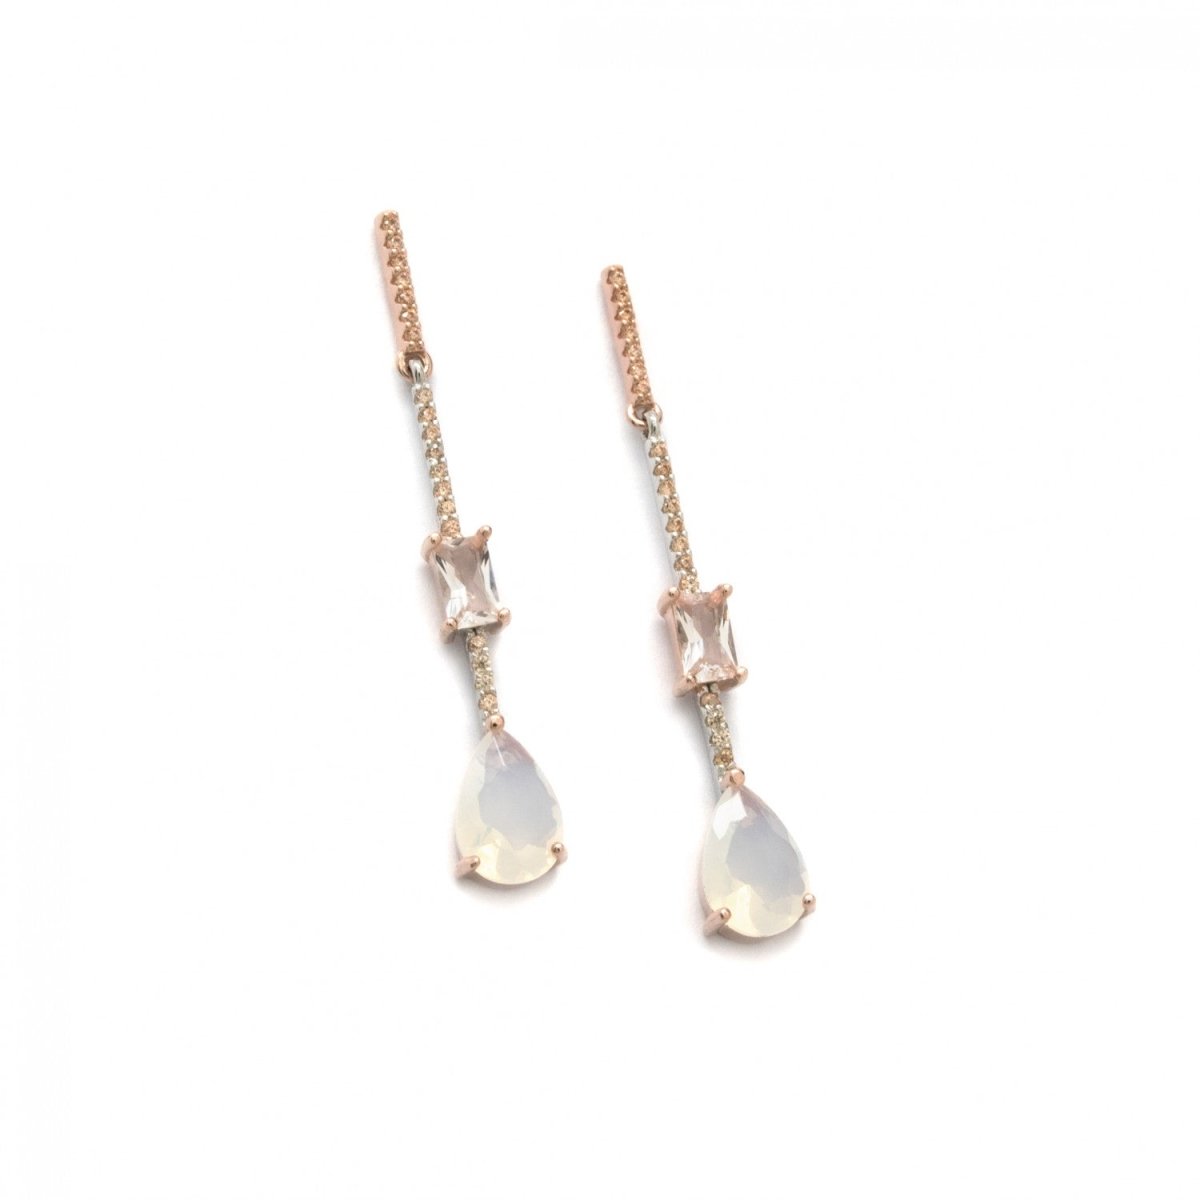 Earrings - Long thin silver earrings stick design with pink zirconias